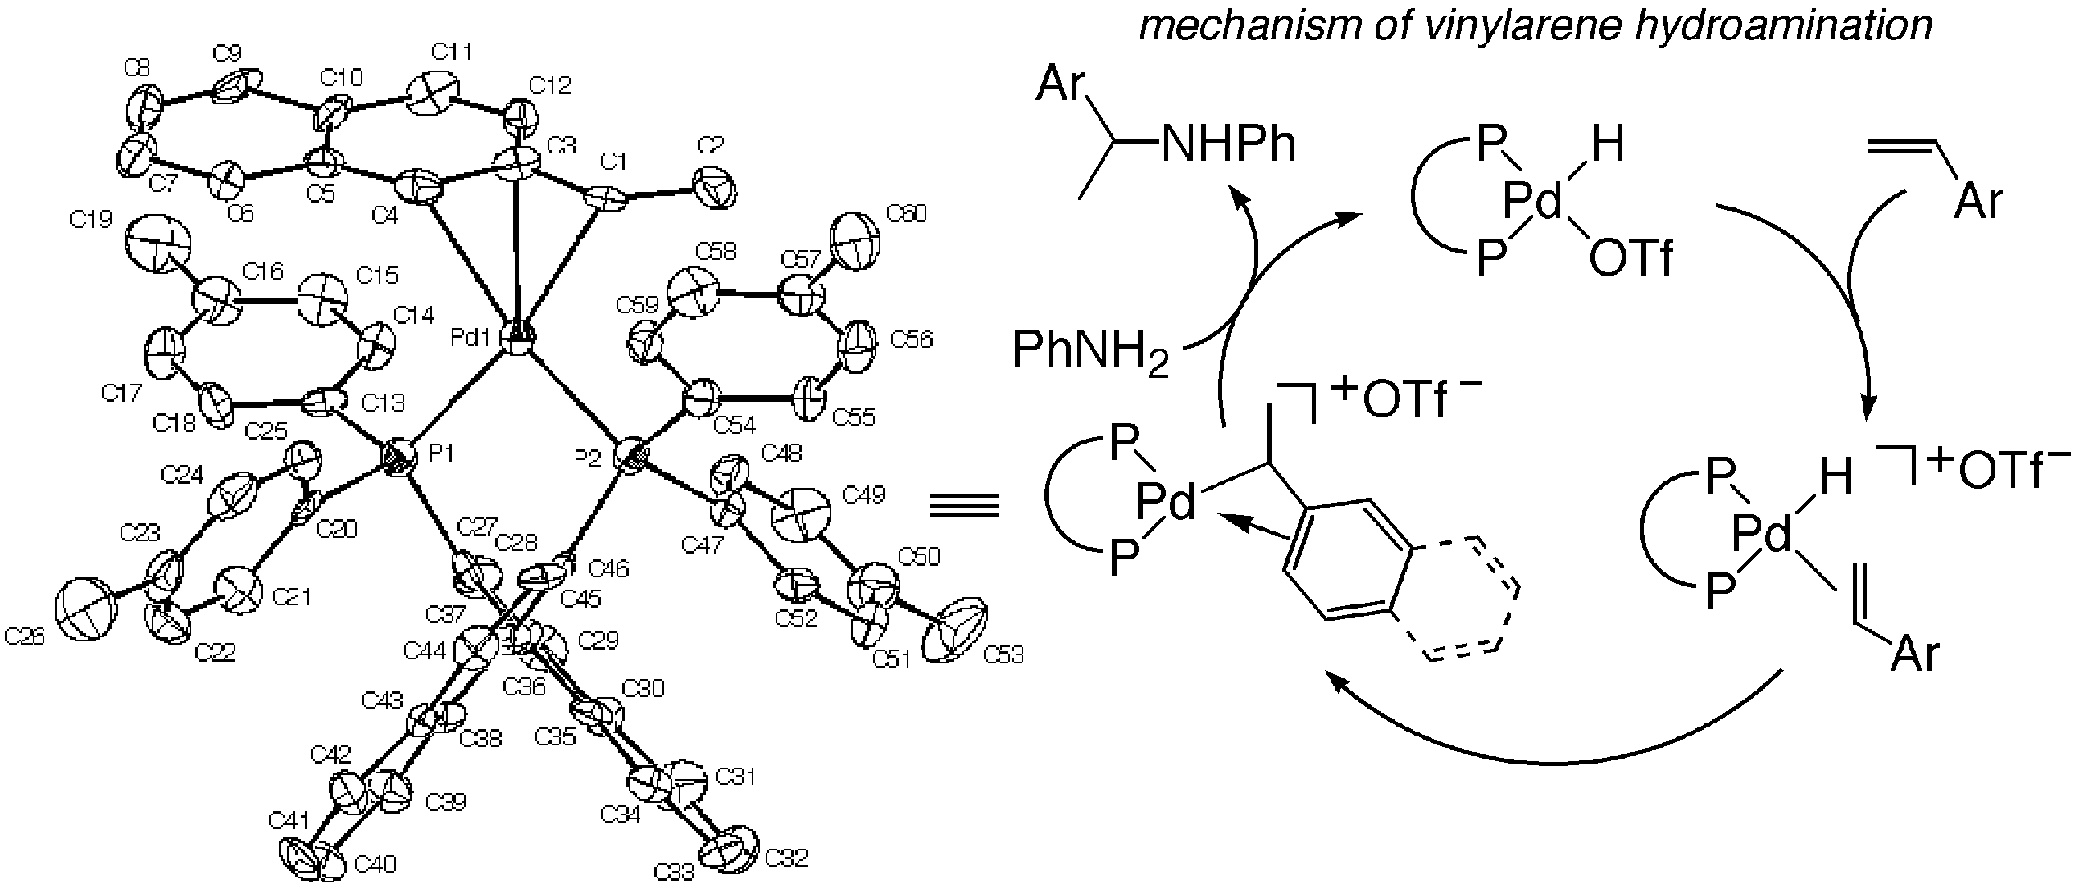 A new pathway for hydroamination. Mechanism of palladium-catalyzed addition of anilines to vinylarenes